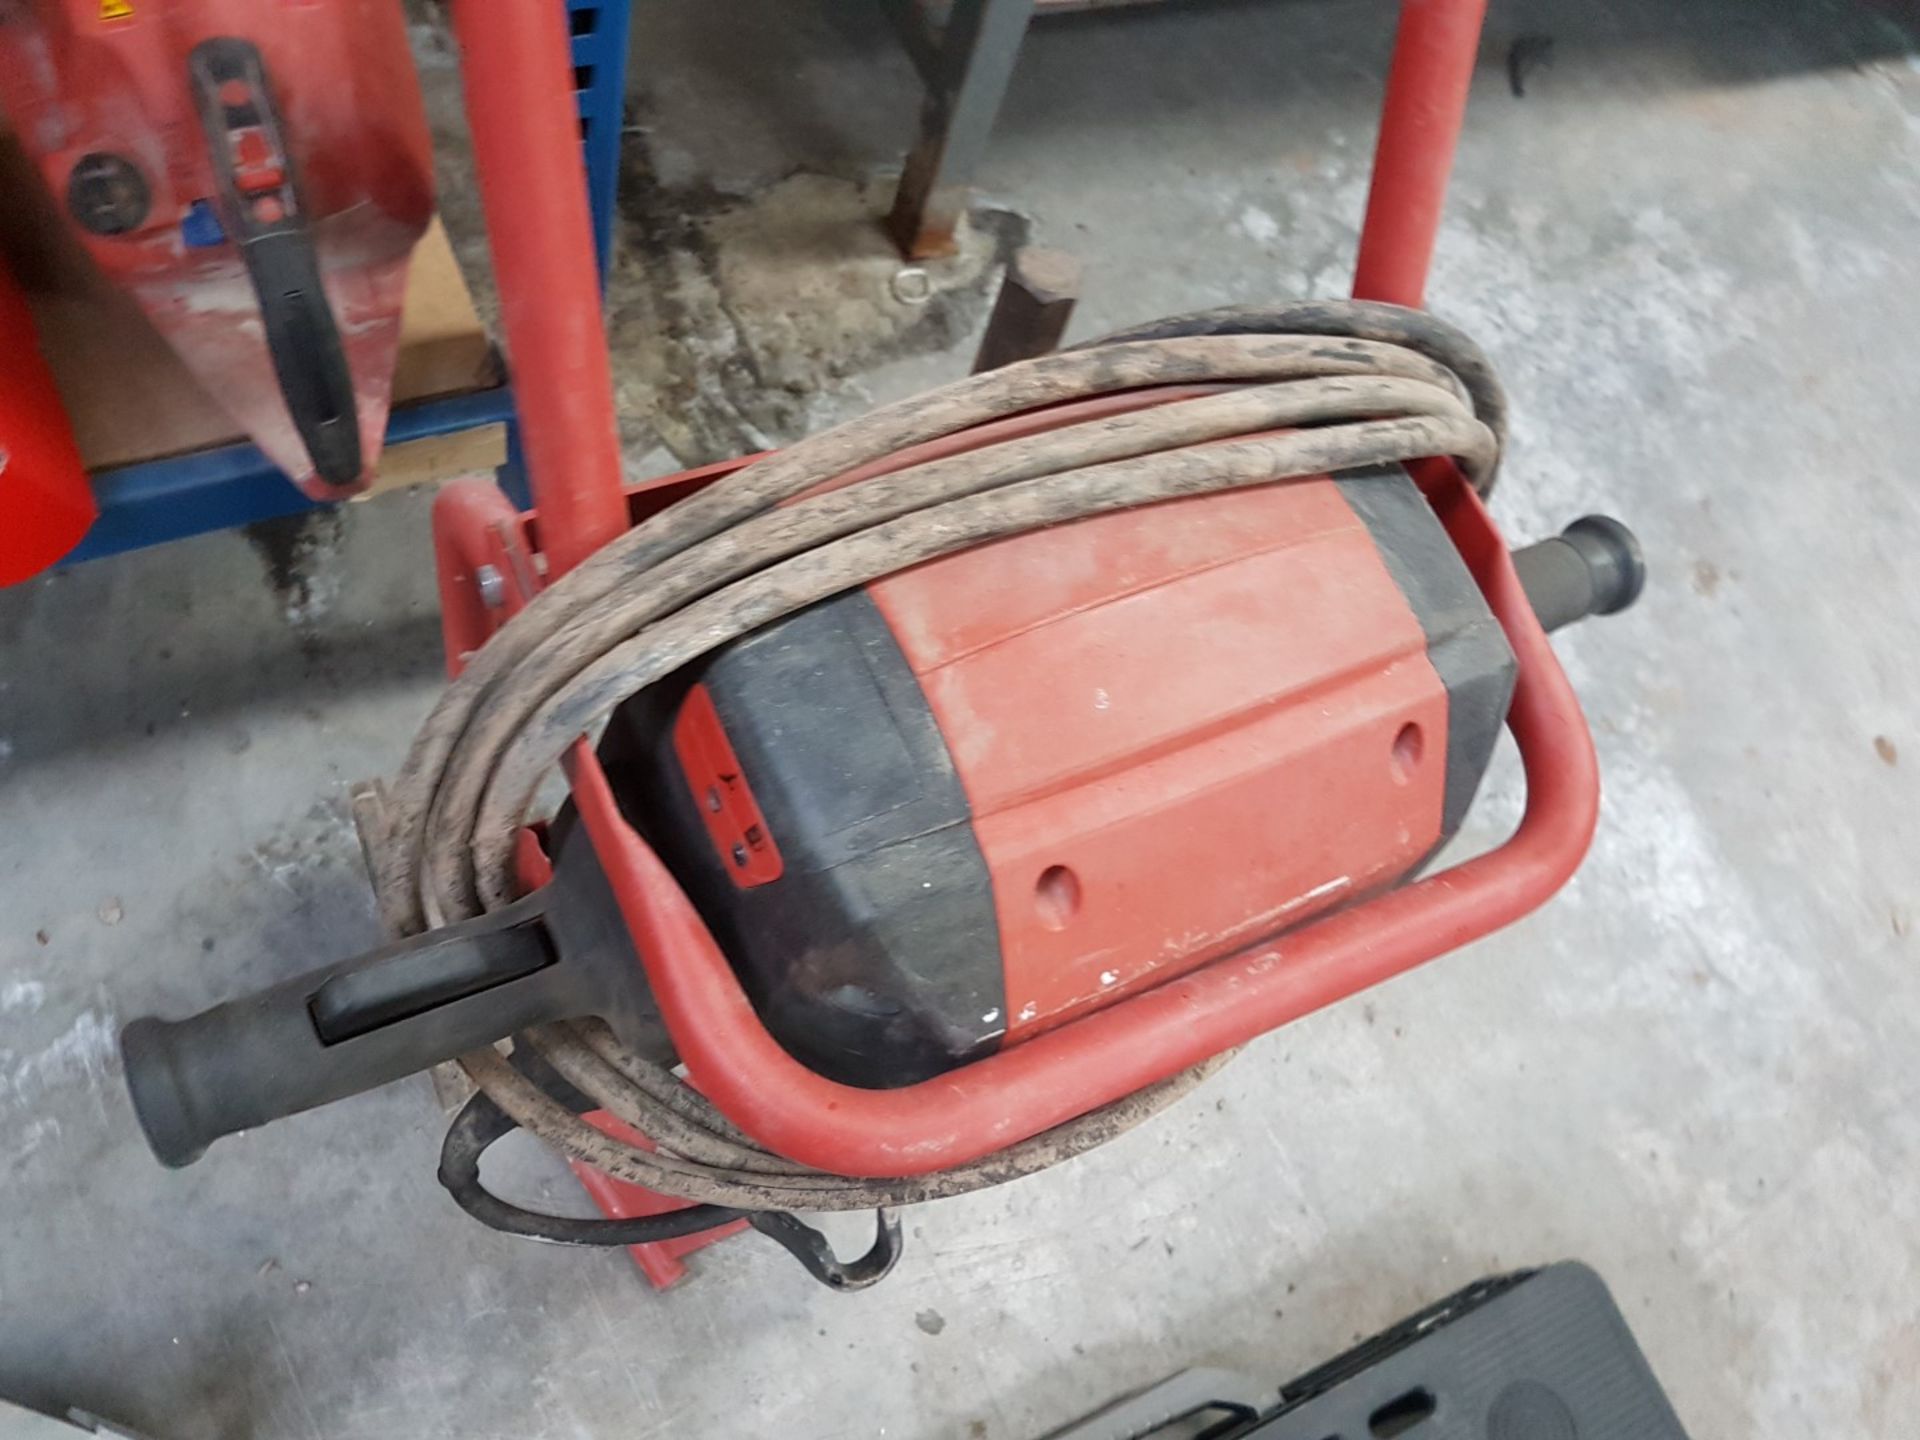 1 x Hilti TE 3000-AVR Concrete Demolition Hammer - With Trolley and Drill Bits - Image 7 of 8